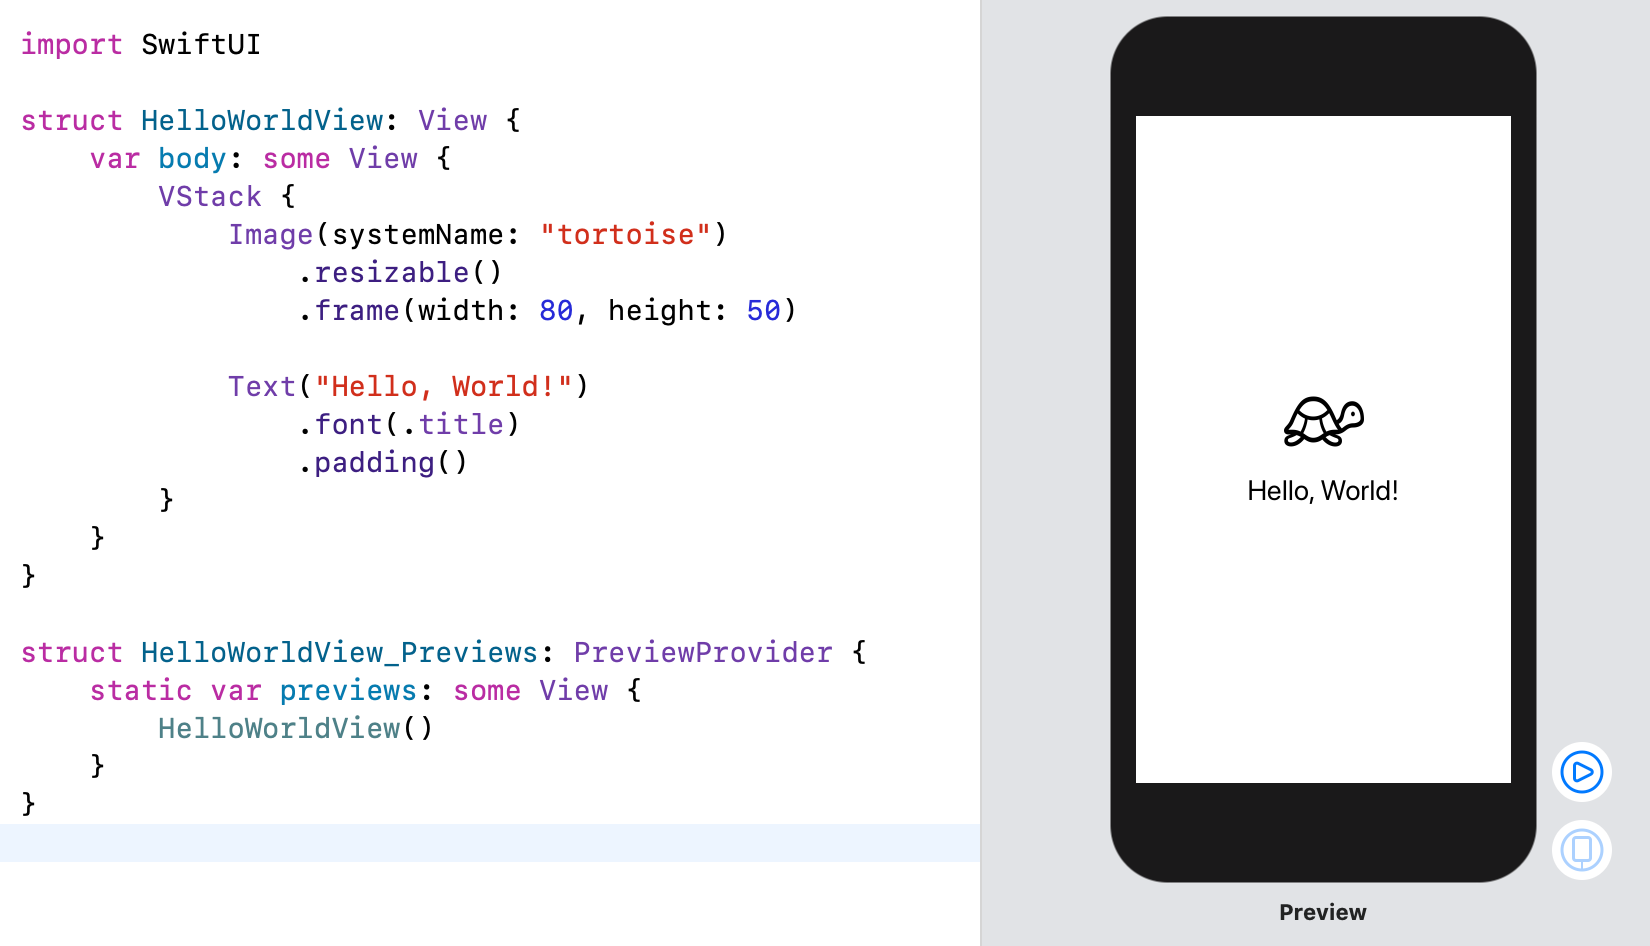 An example of a piece of code and its visual representation side by side in SwiftUI.